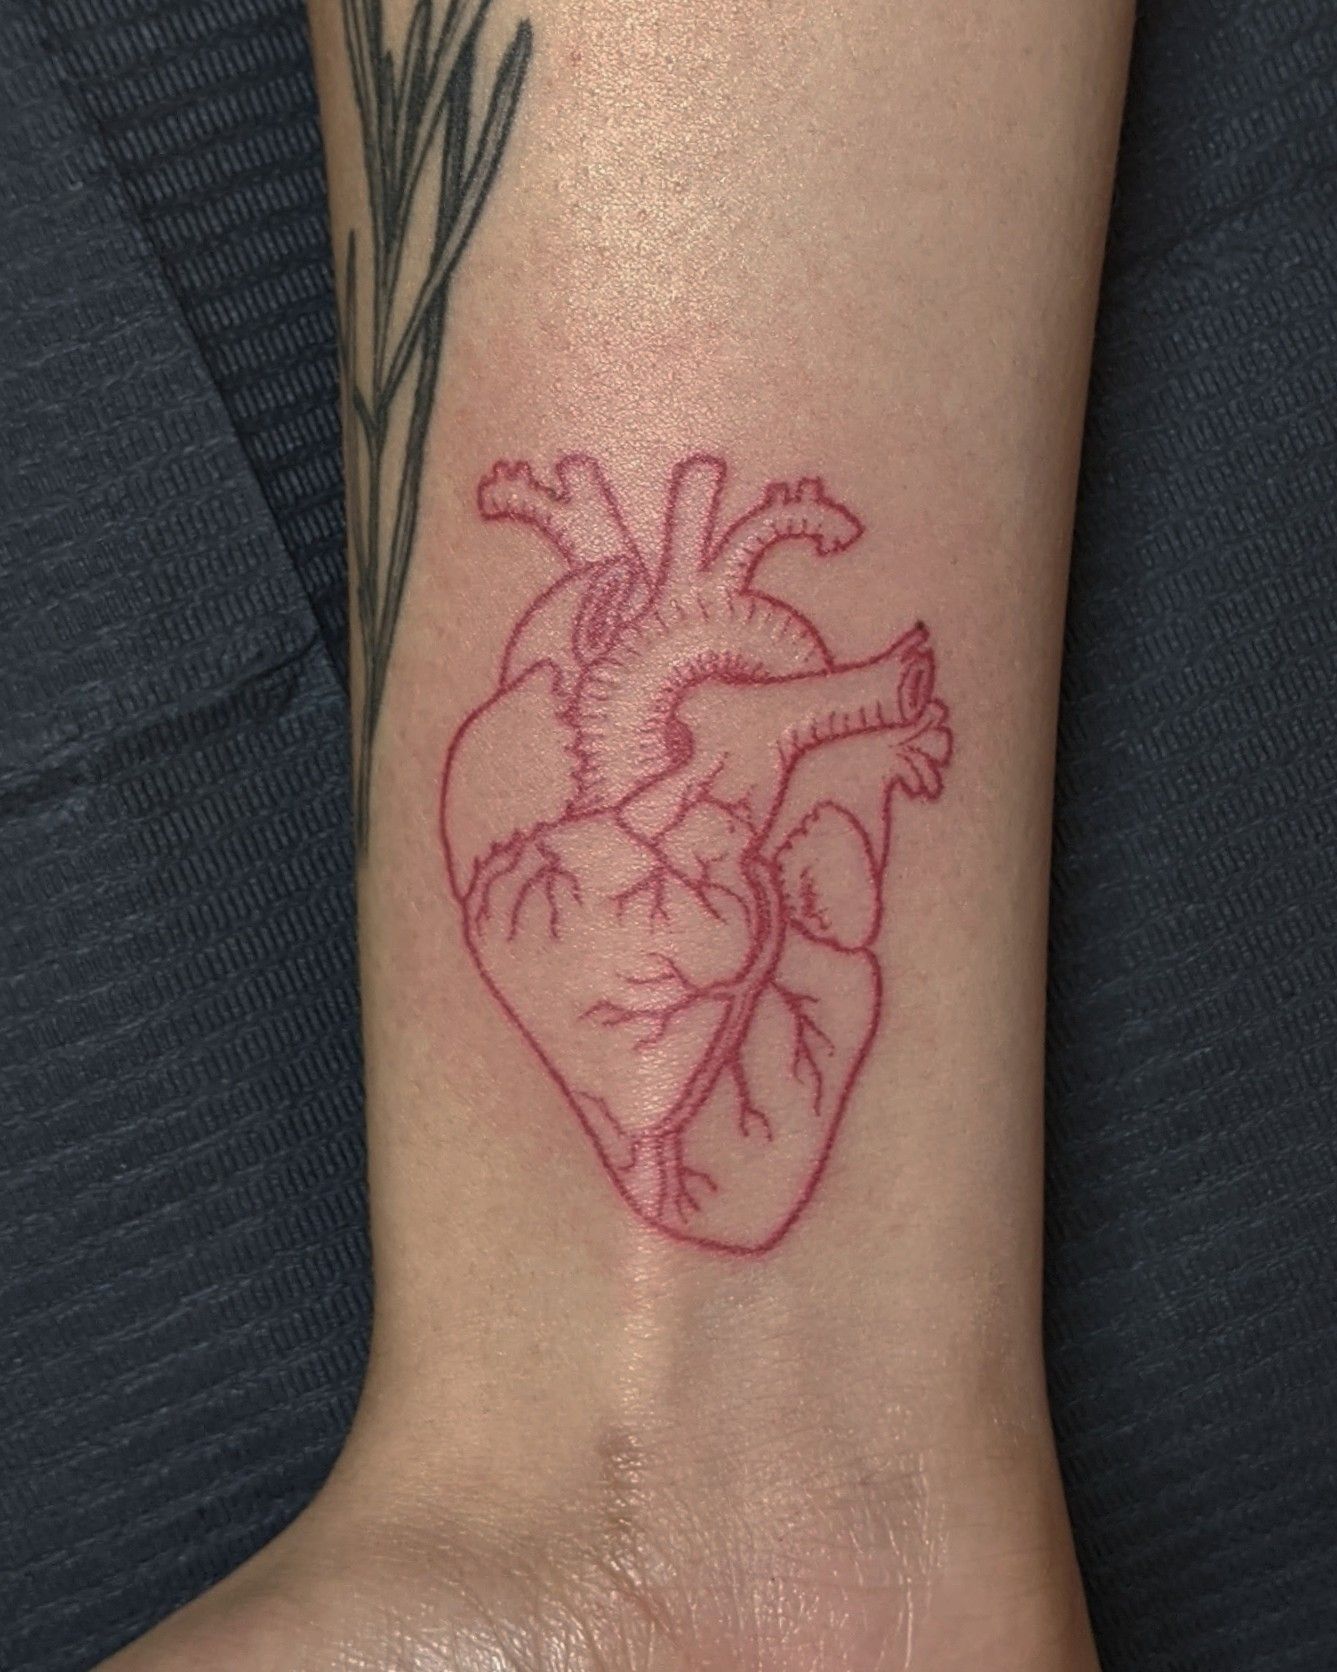 Different heart tattoos done by our tattoo apprentice ⁠ ⁠ 🖌: @a_u_r.a ⁠ ⁠  FOR BOOKINGS:⁠ 📩 hello@markdtattoo.com.au⁠ �... | Instagram